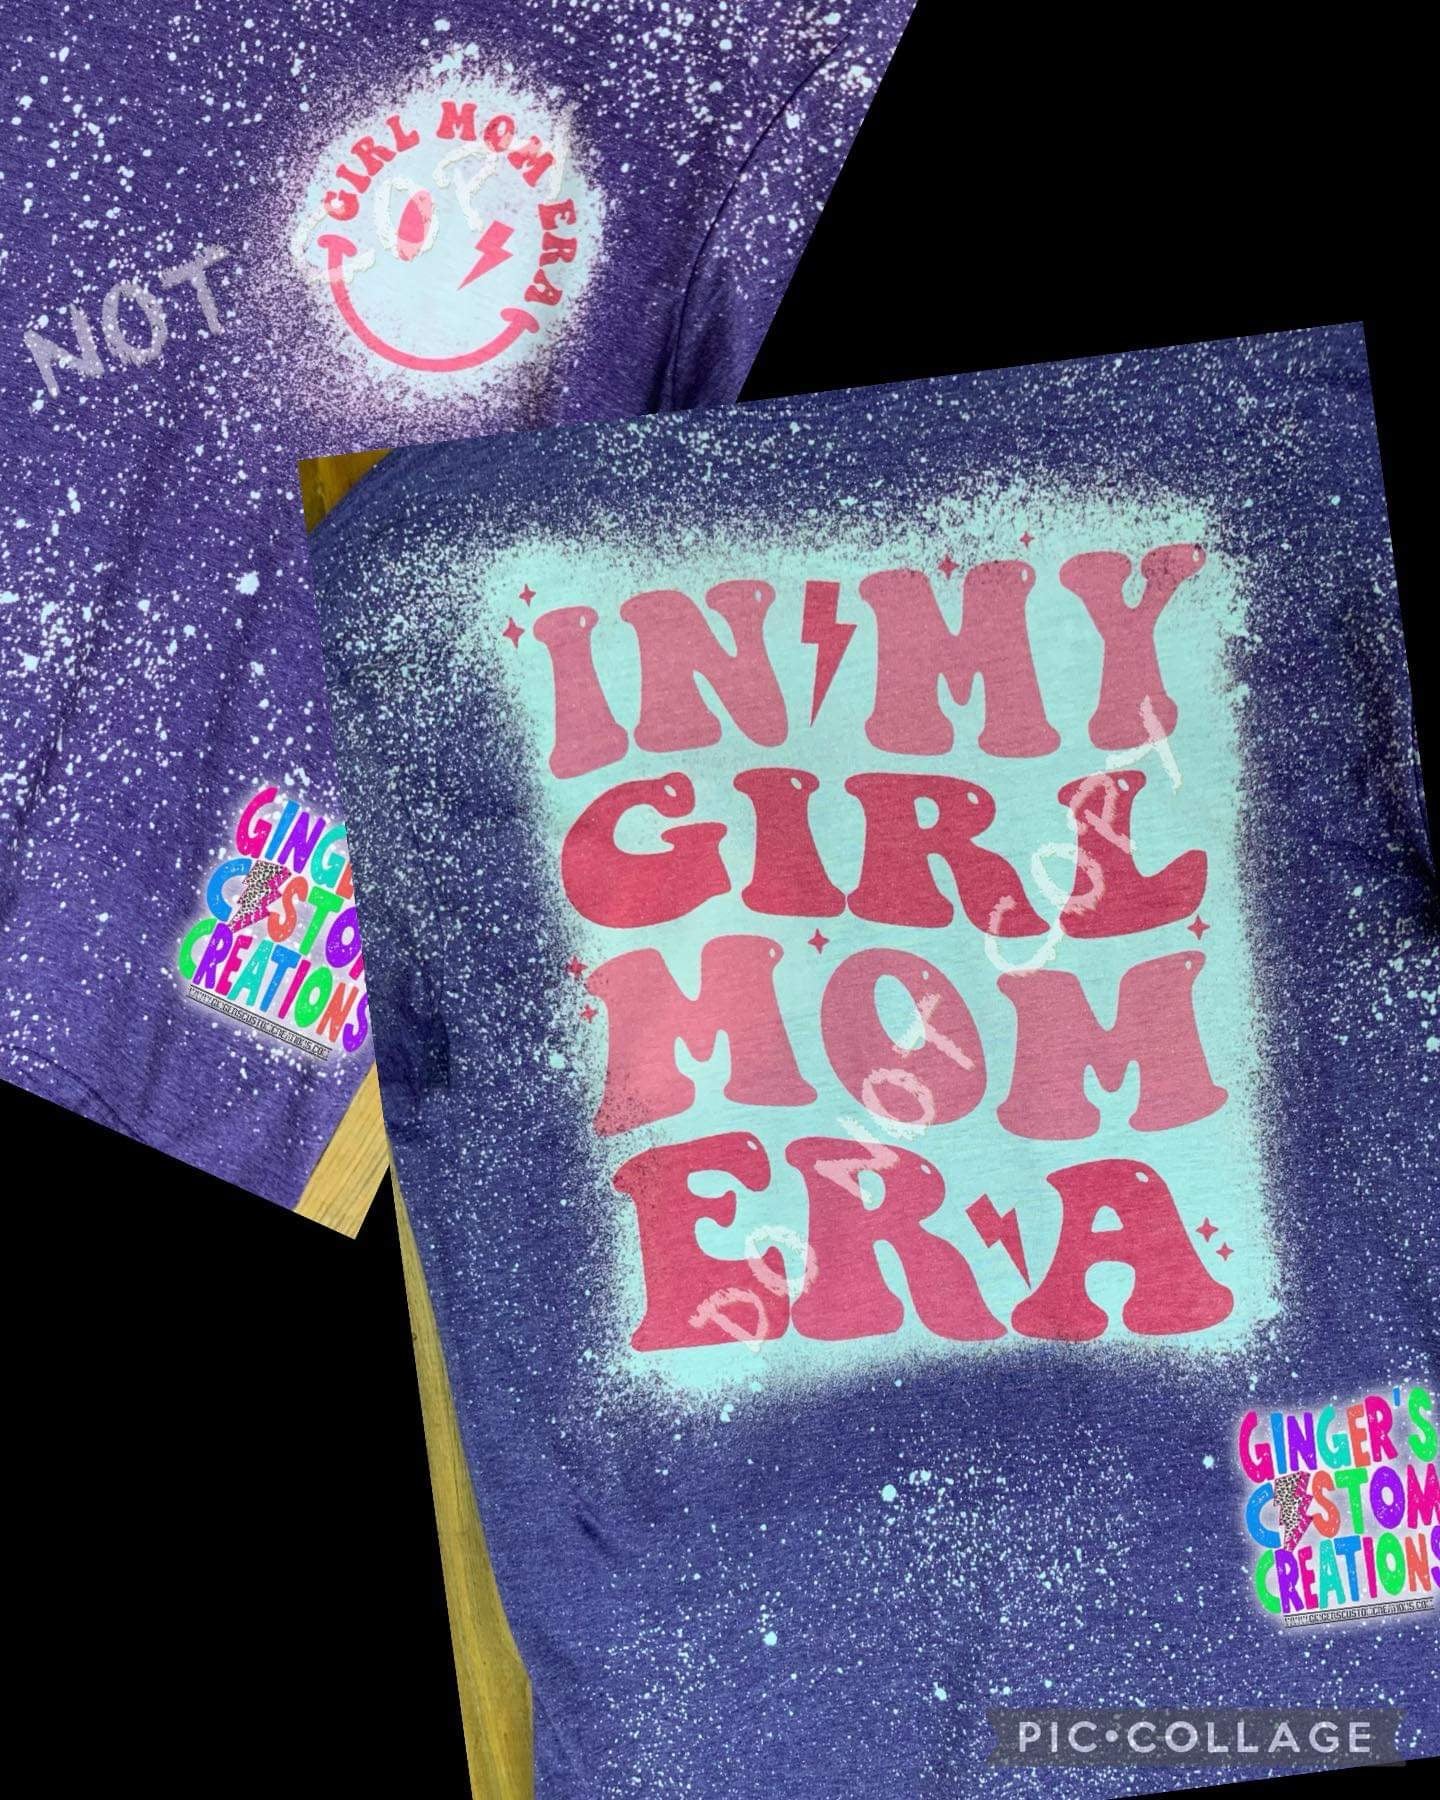 In my girl mom era purple front&back   - BLEACHED TSHIRT